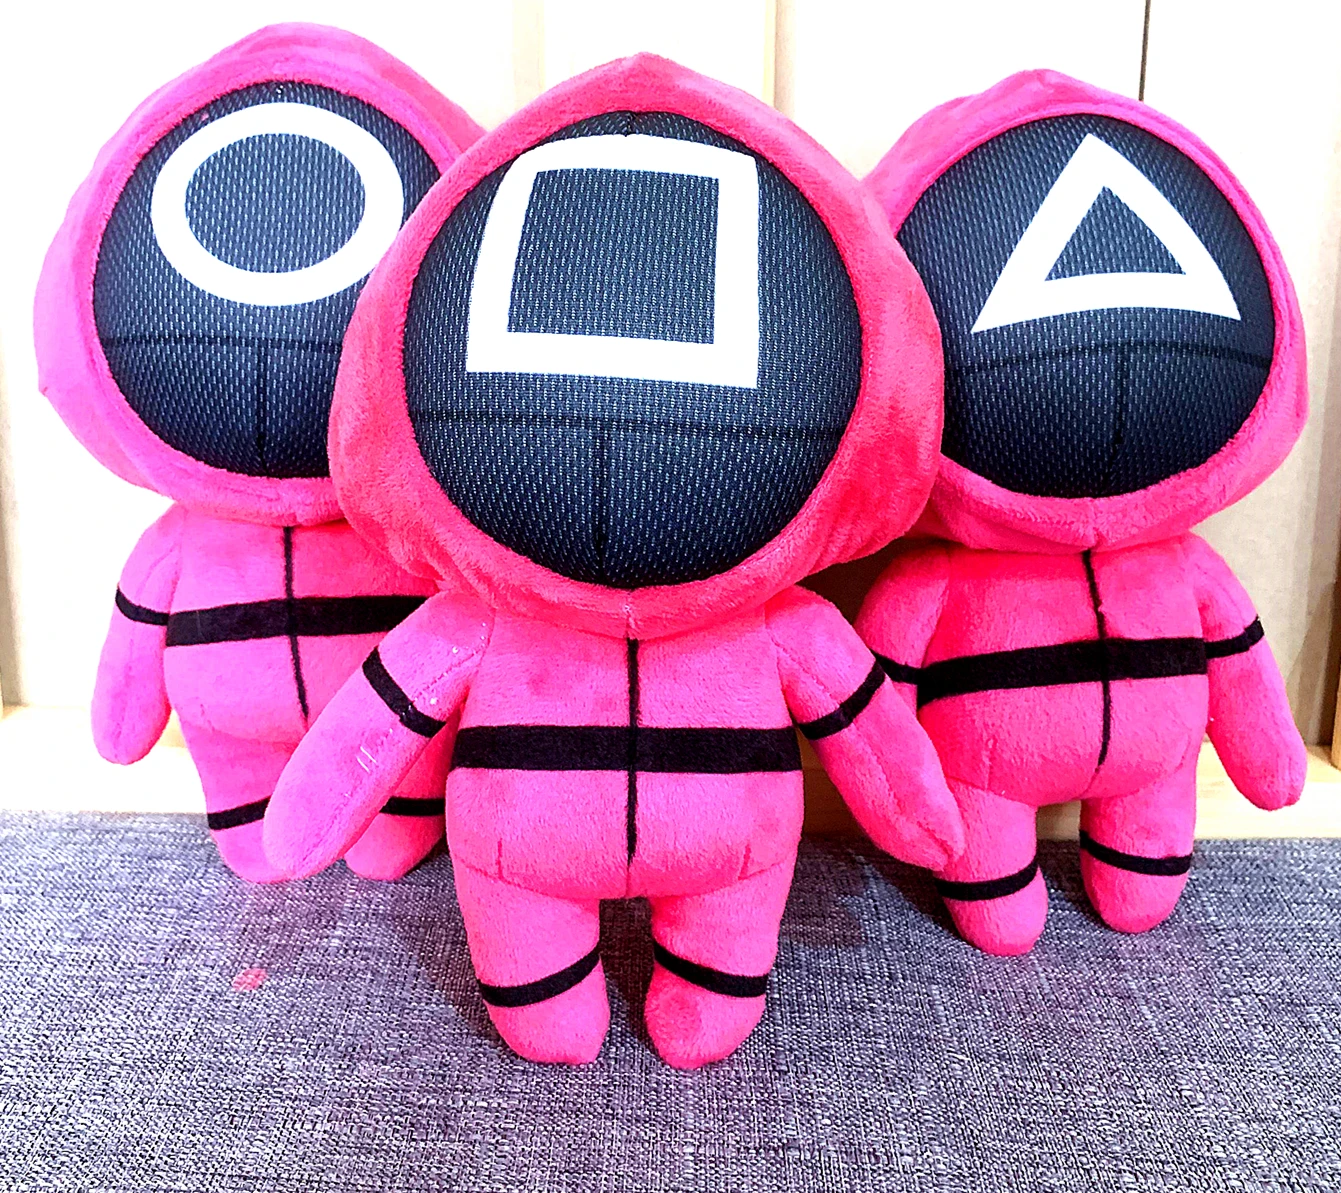 

1PC Squid Game Stuffed Plush Toys Korea TV Squid Game Peluche Soft Doll Room Decoration Halloween Christmas Gifts for Children